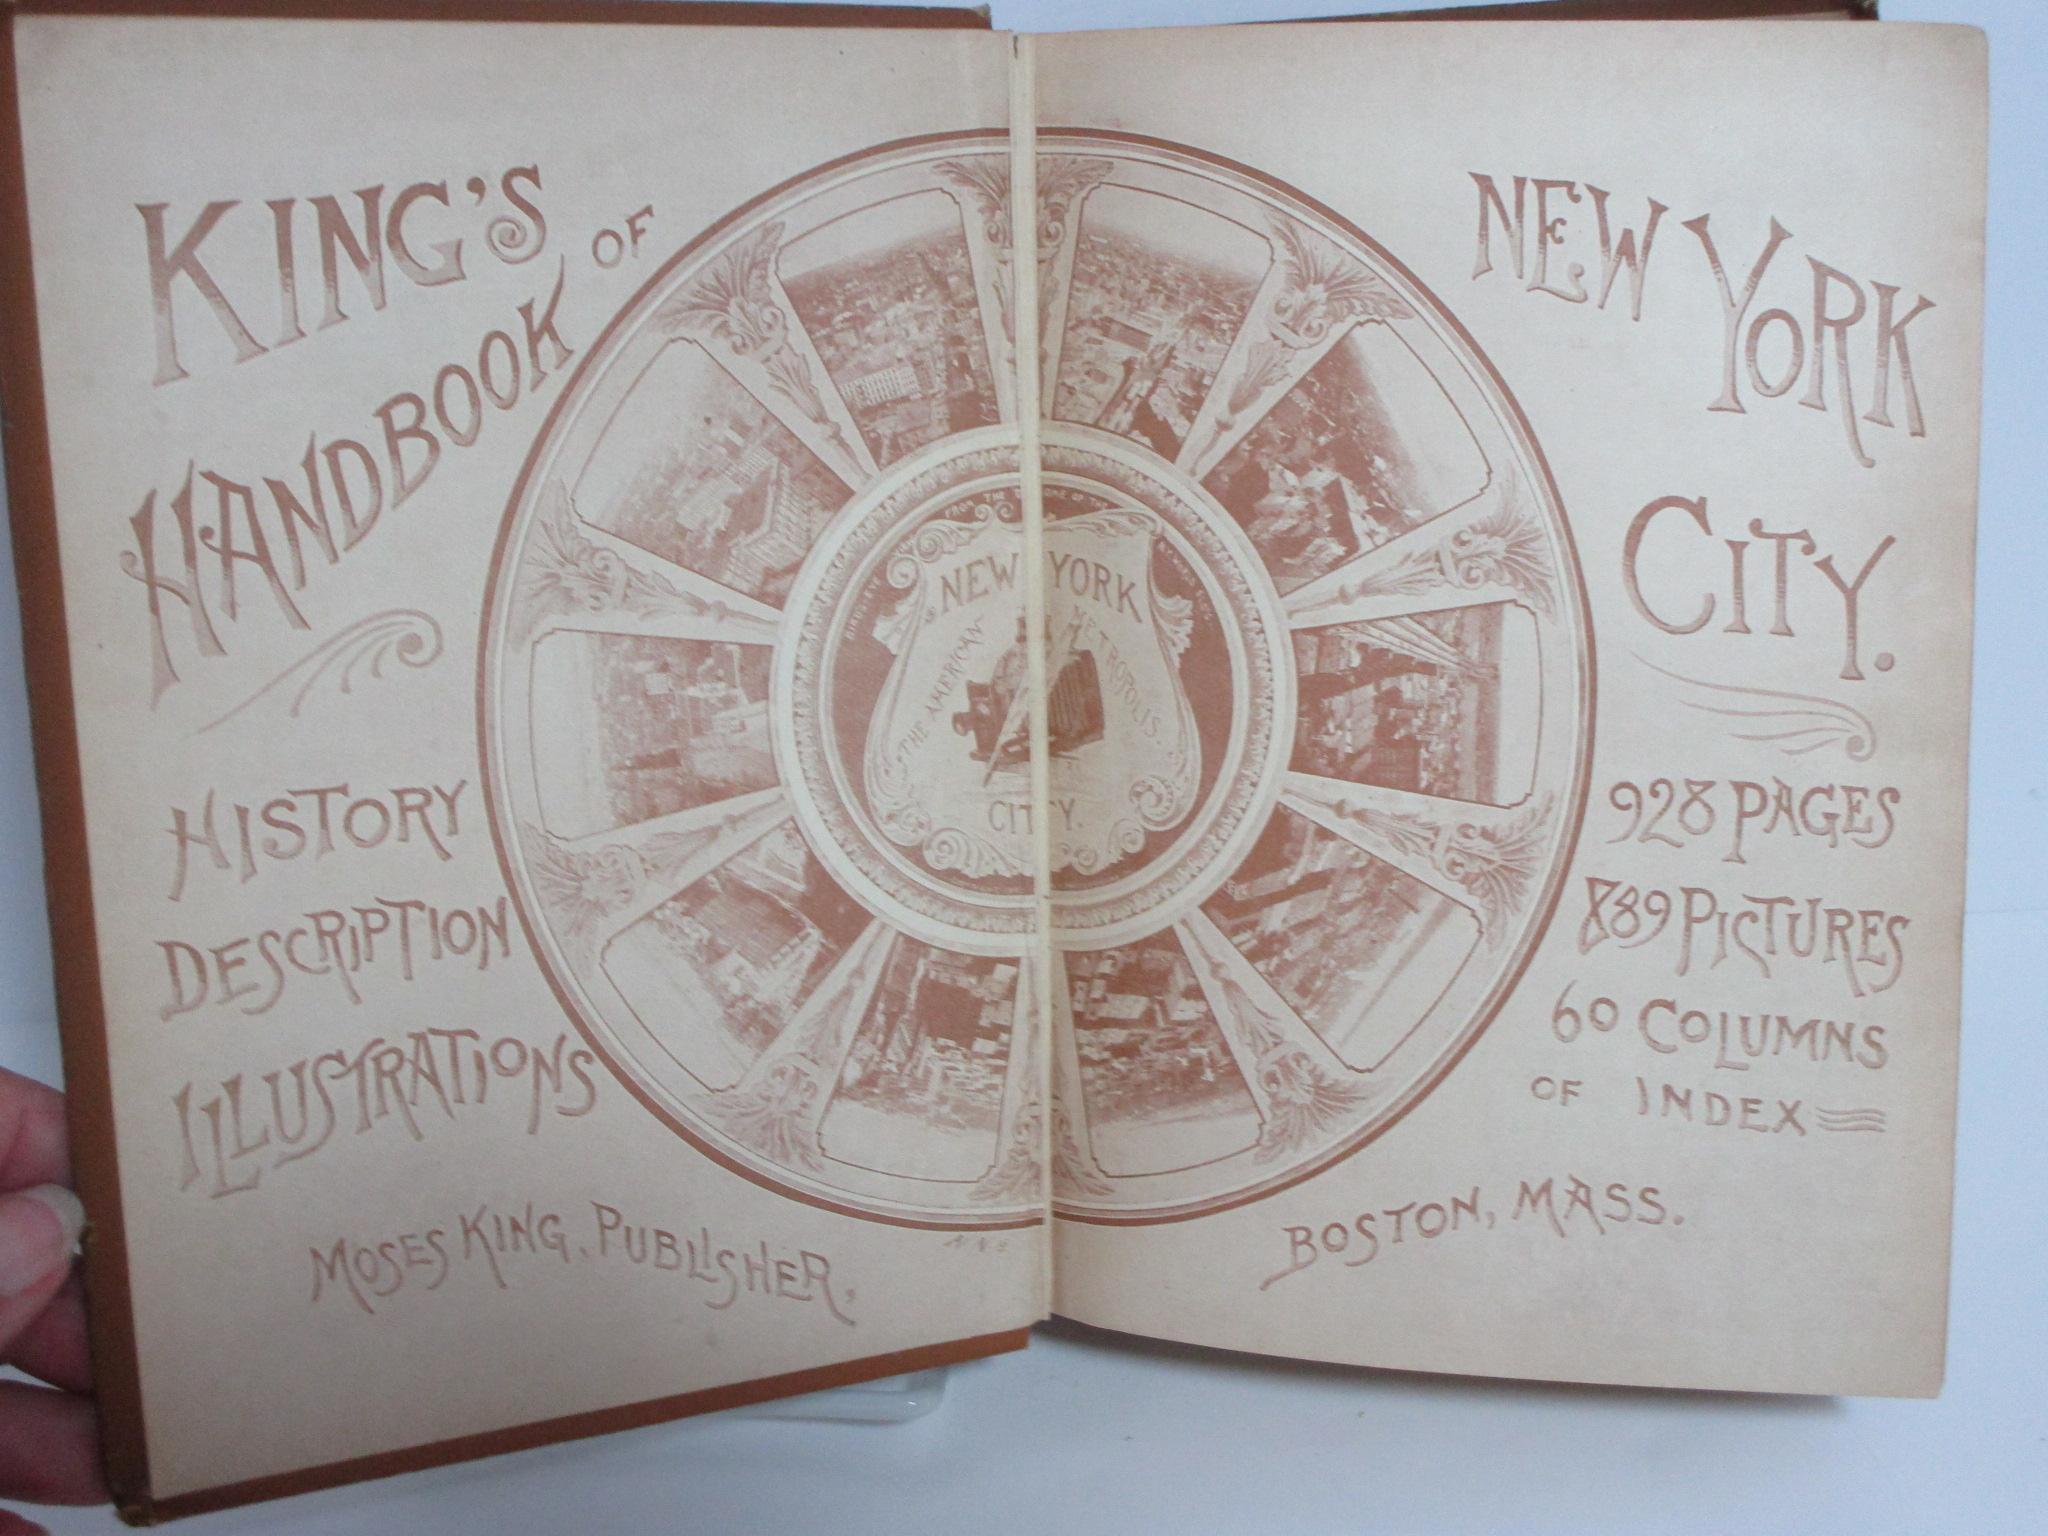 King's Handbook of New York City w/Over 800 Illustrations w/Ad for Fire Insurance